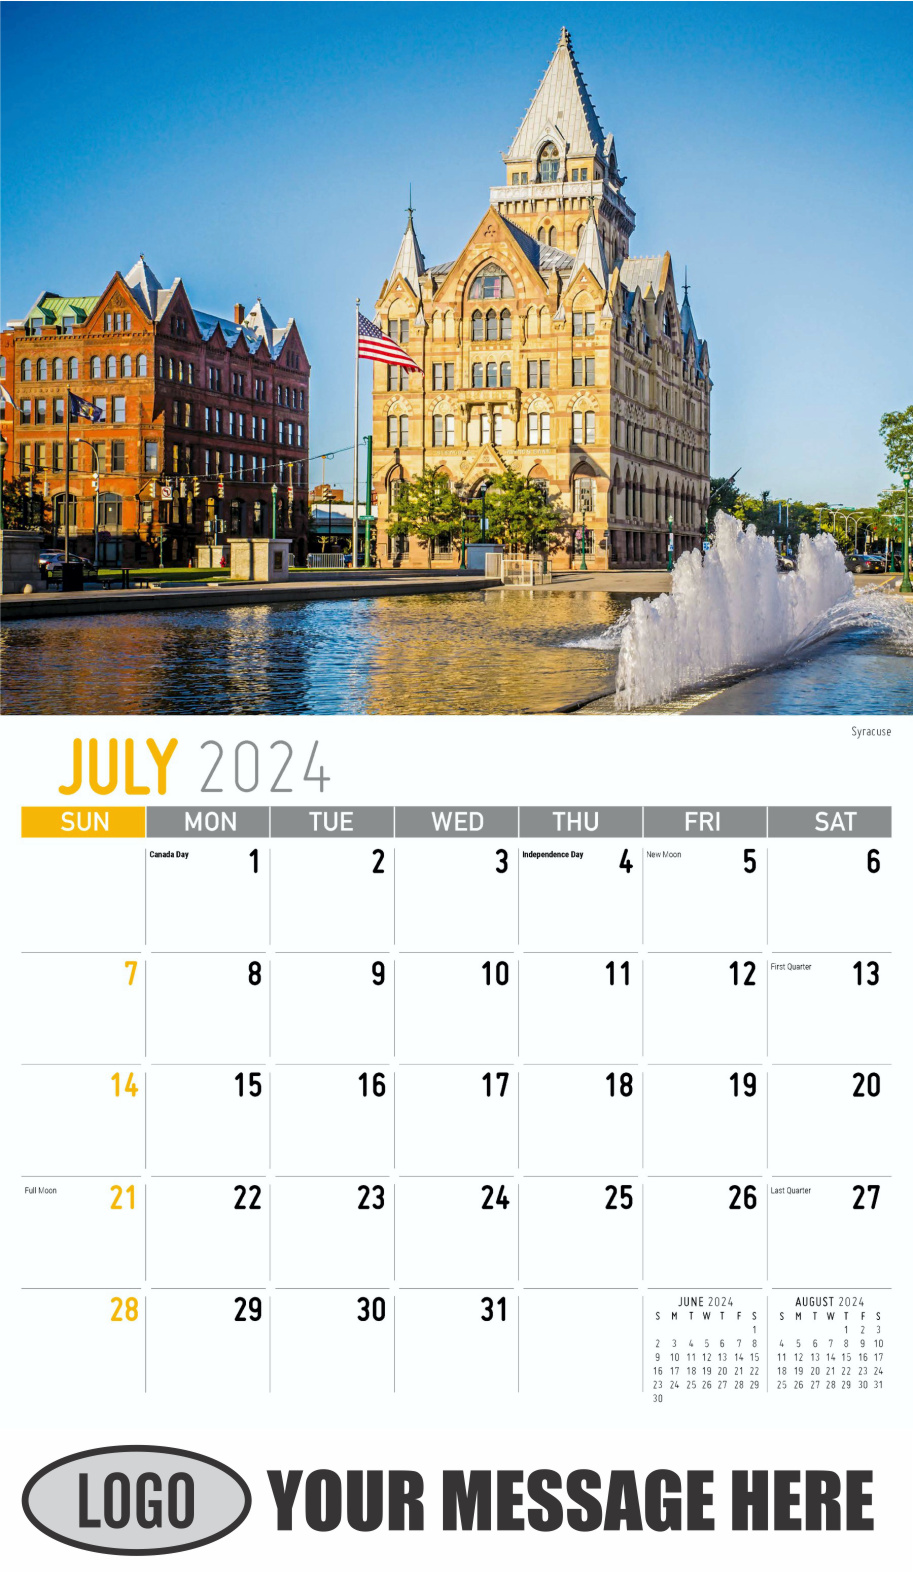 Scenes of New York 2024 Business Promotional Wall Calendar - July